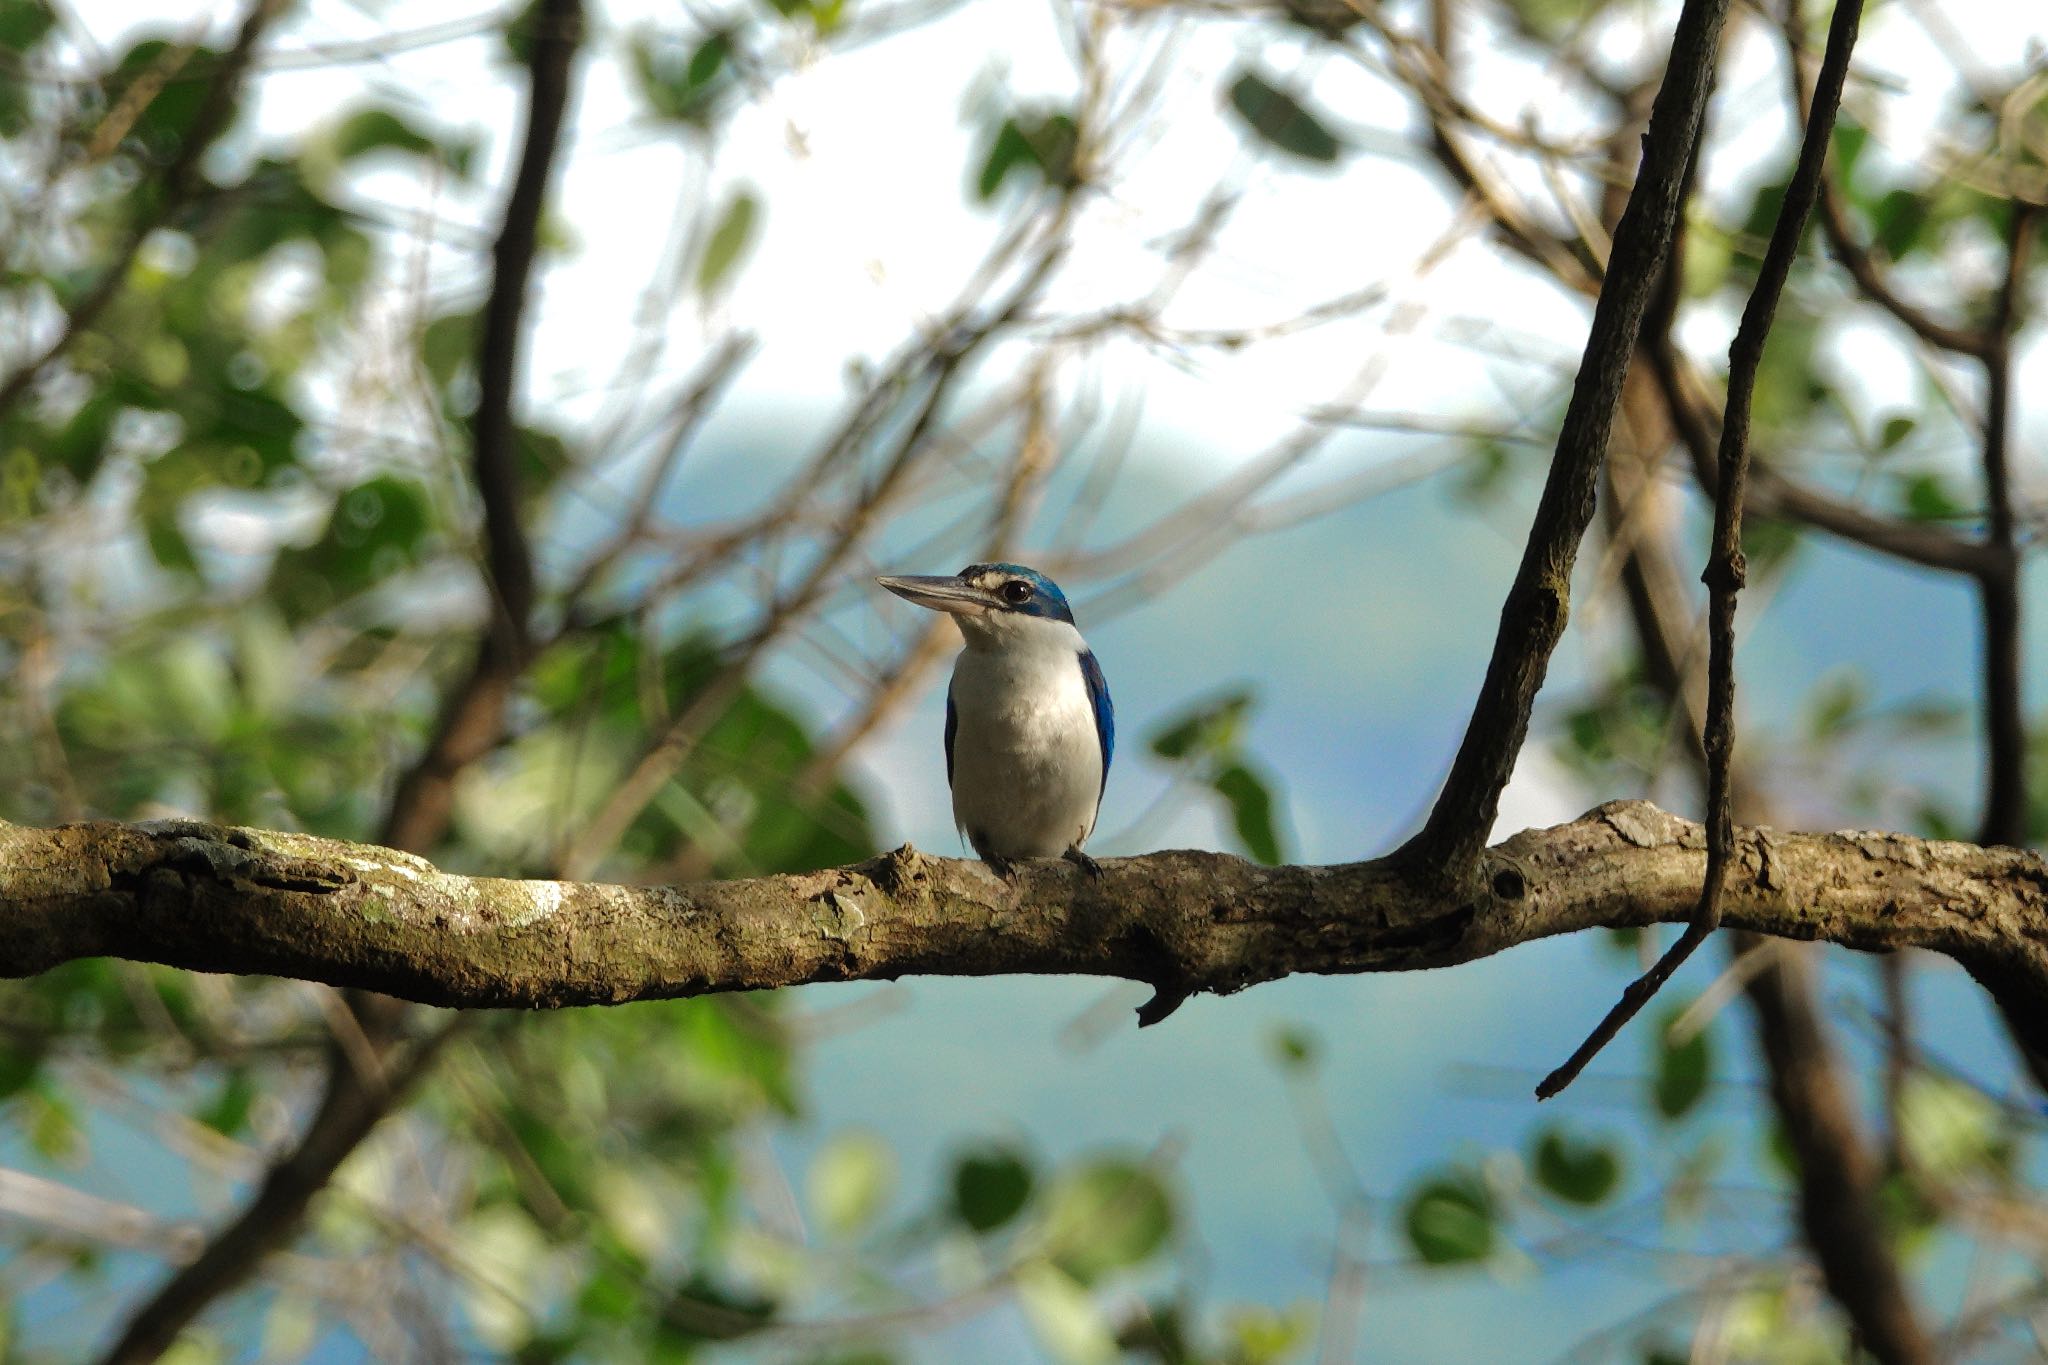 Photo of Collared Kingfisher at Sungei Buloh Wetland Reserve by のどか